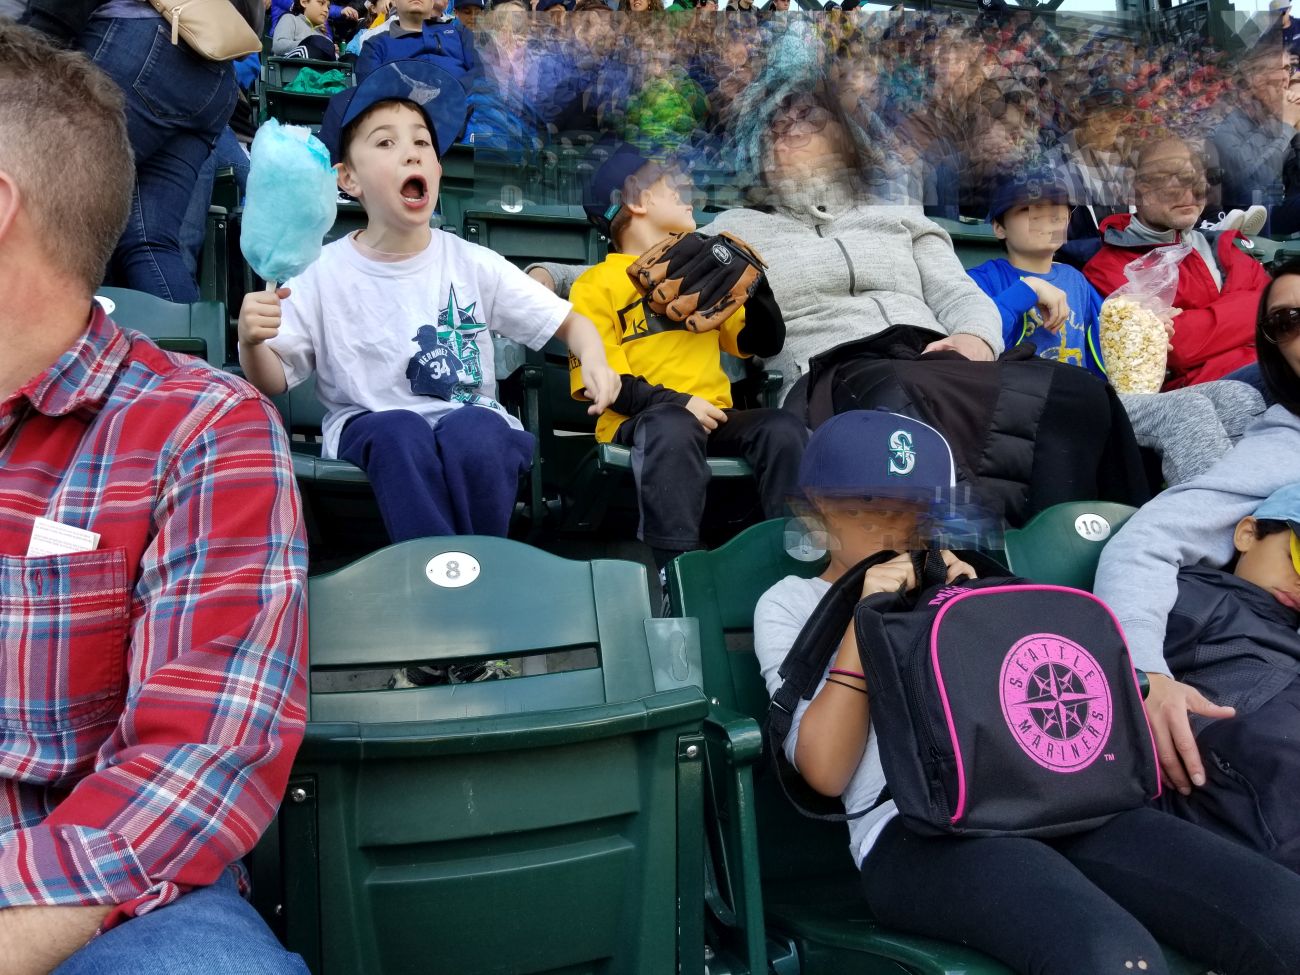 My Problem With The 2017 Mariners Kids Club